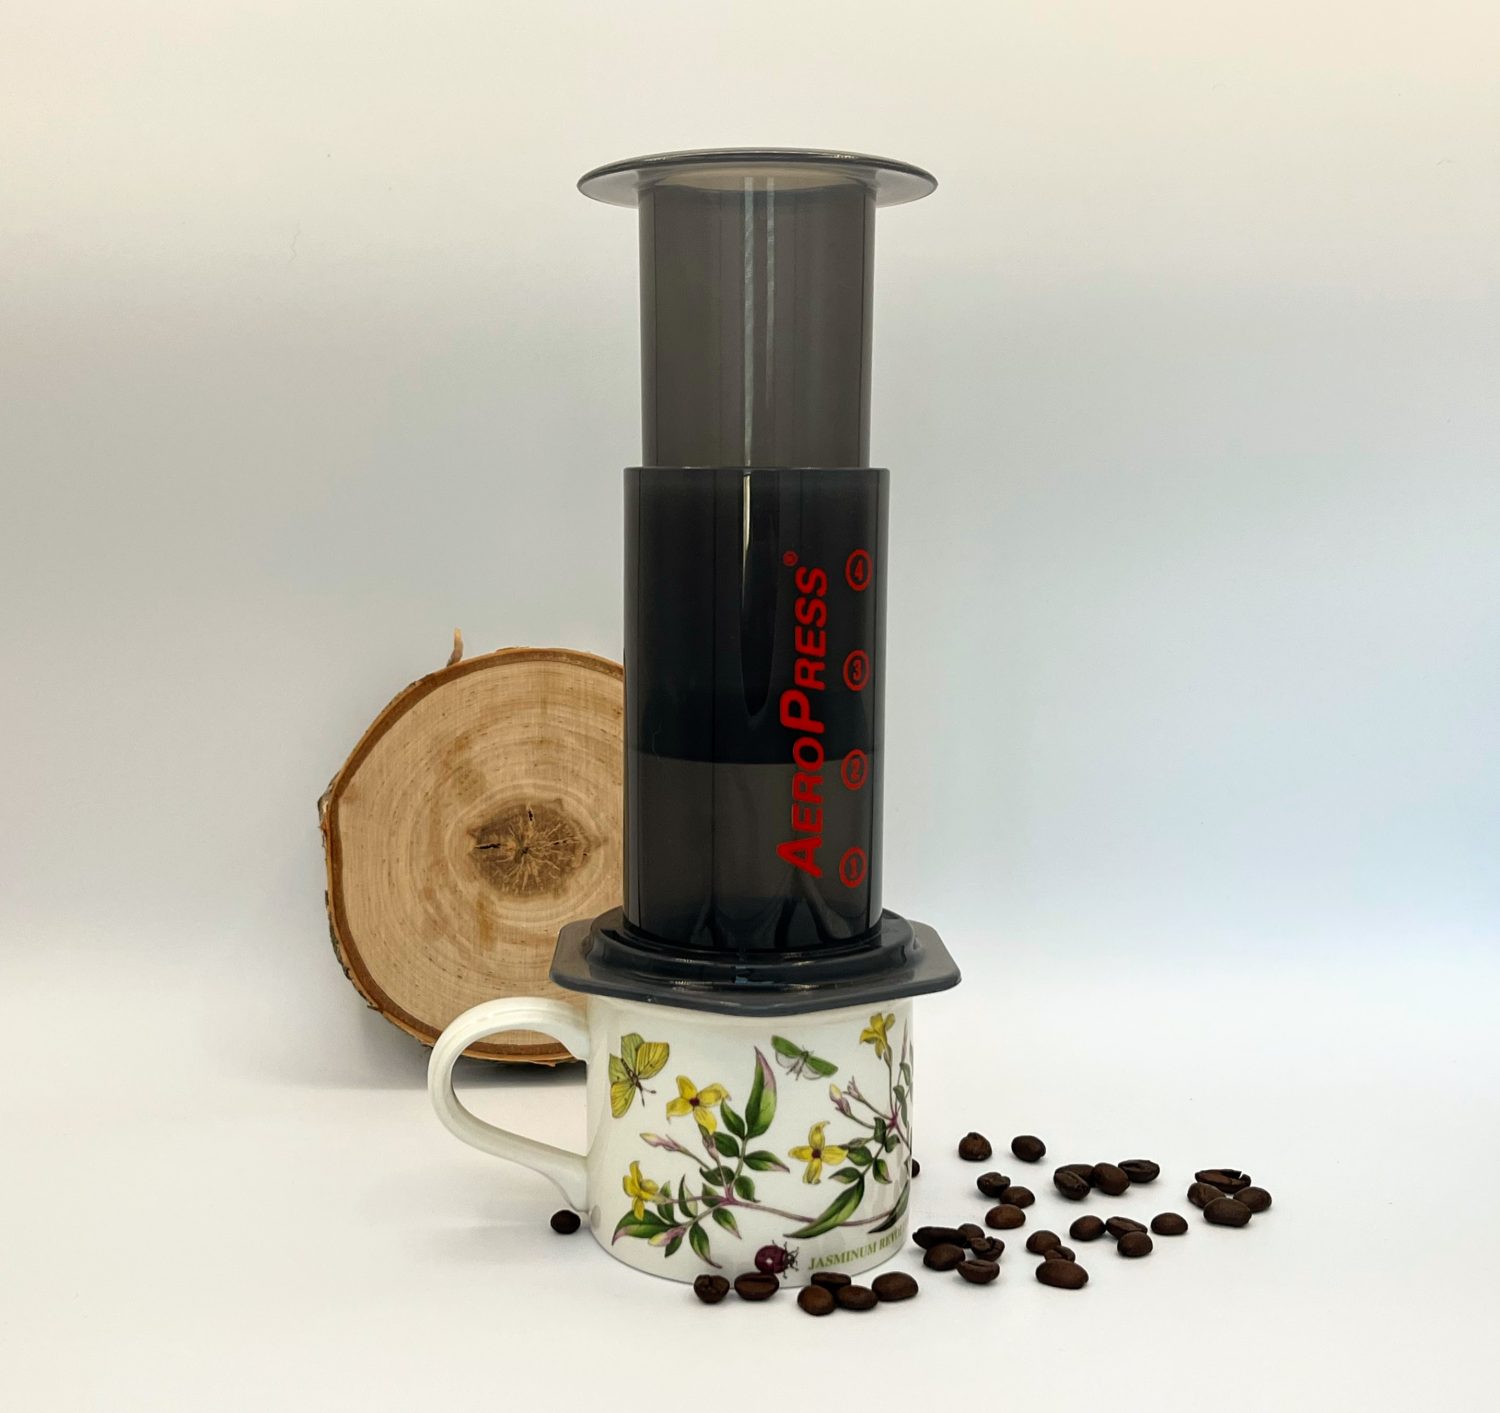 aeropress-sitting-on-mug-with-scattered-coffee-beans